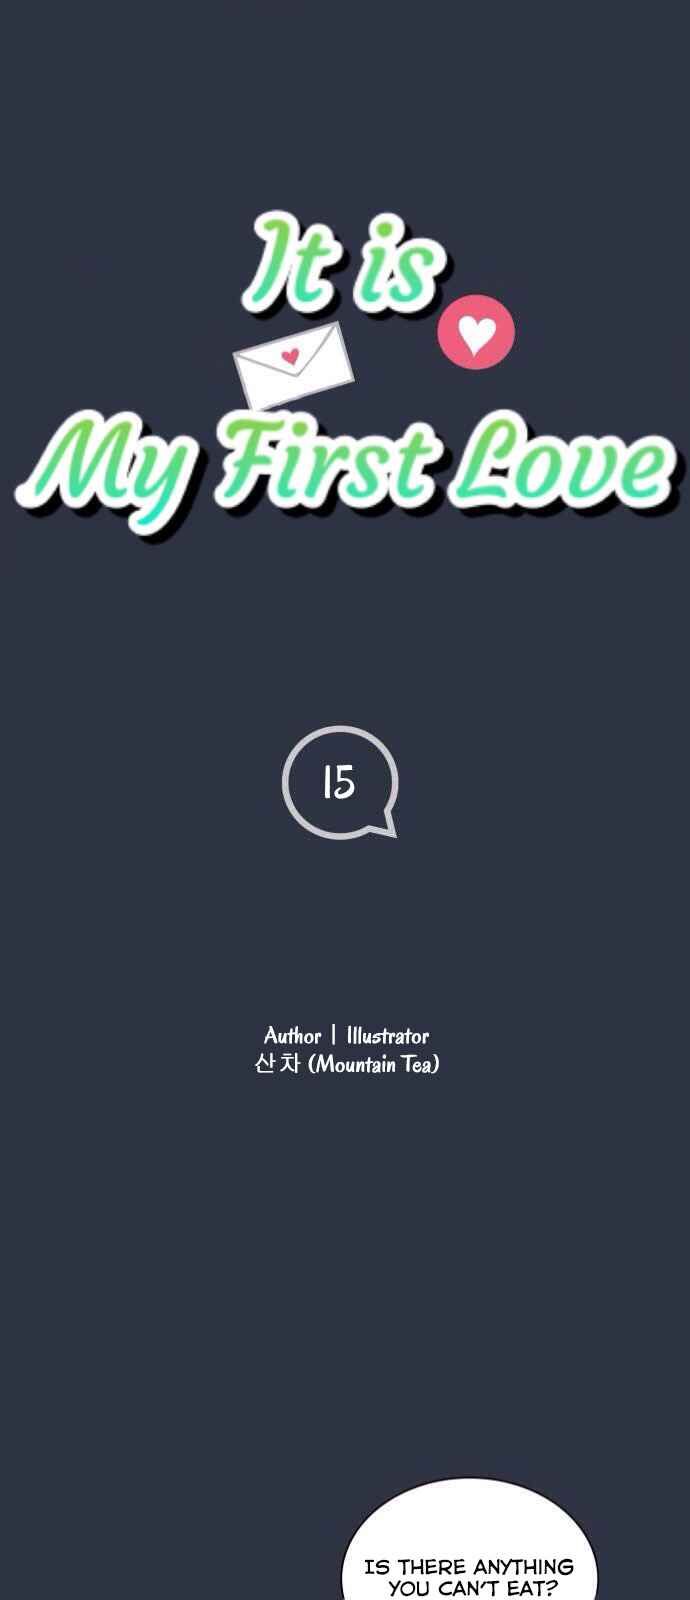 It Is My First Love Chapter 15